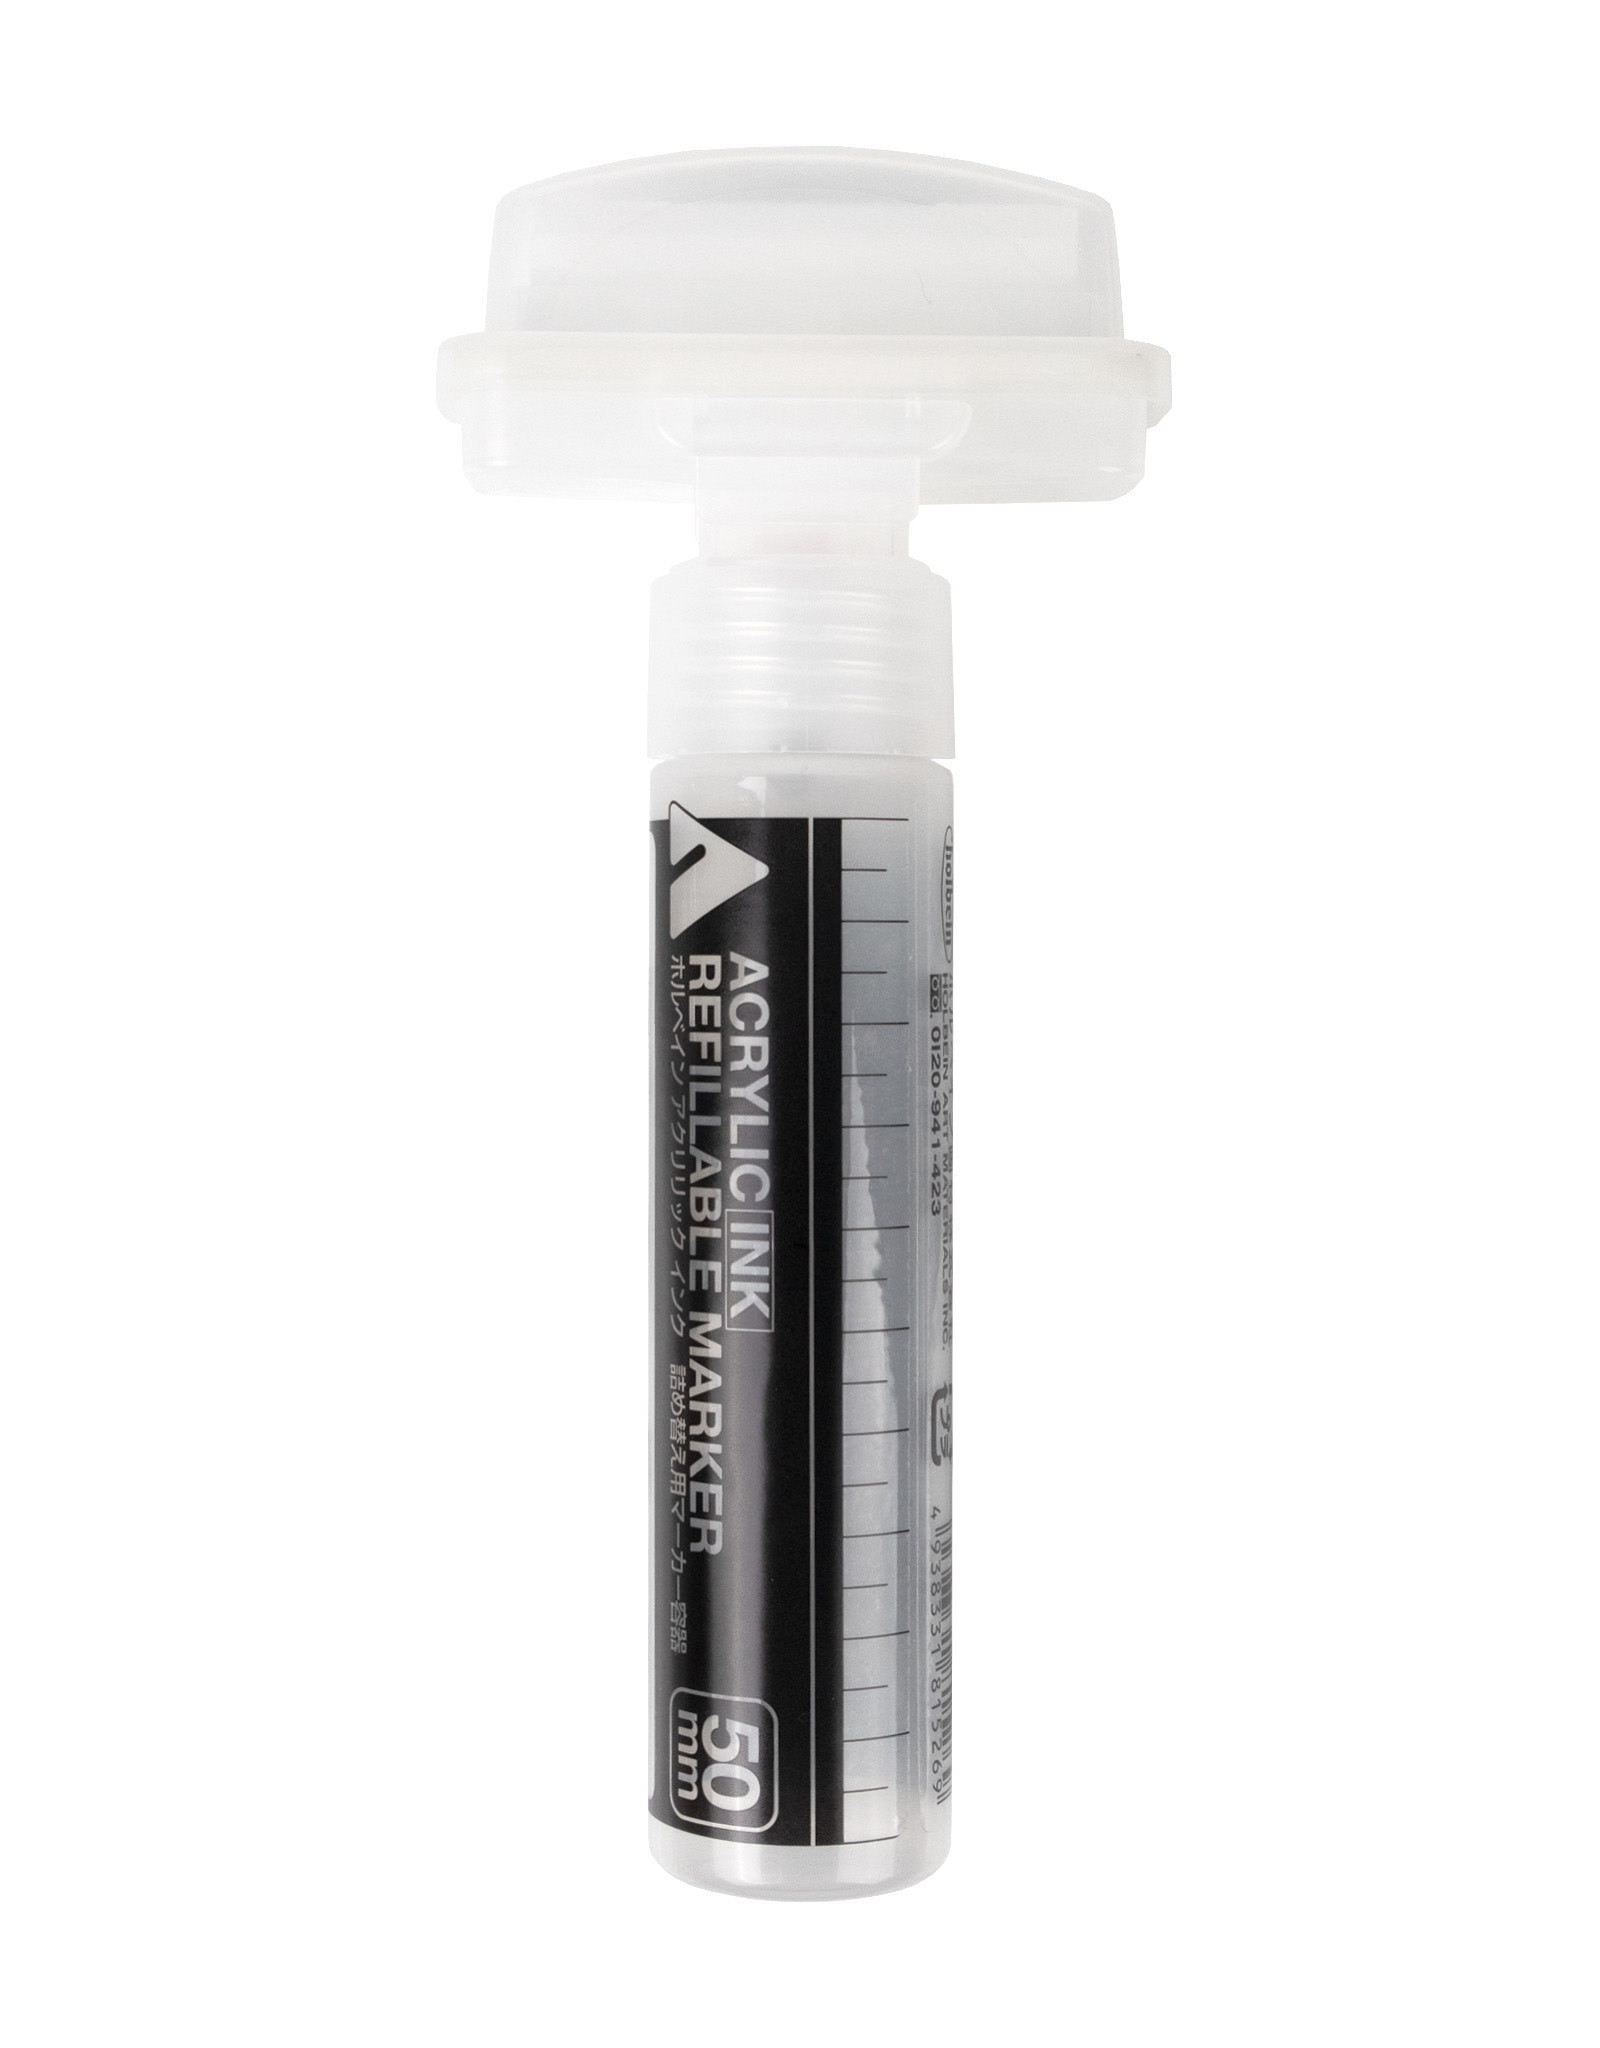 CLEARANCE Holbein Refillable Marker, 50mm Wide Stroke